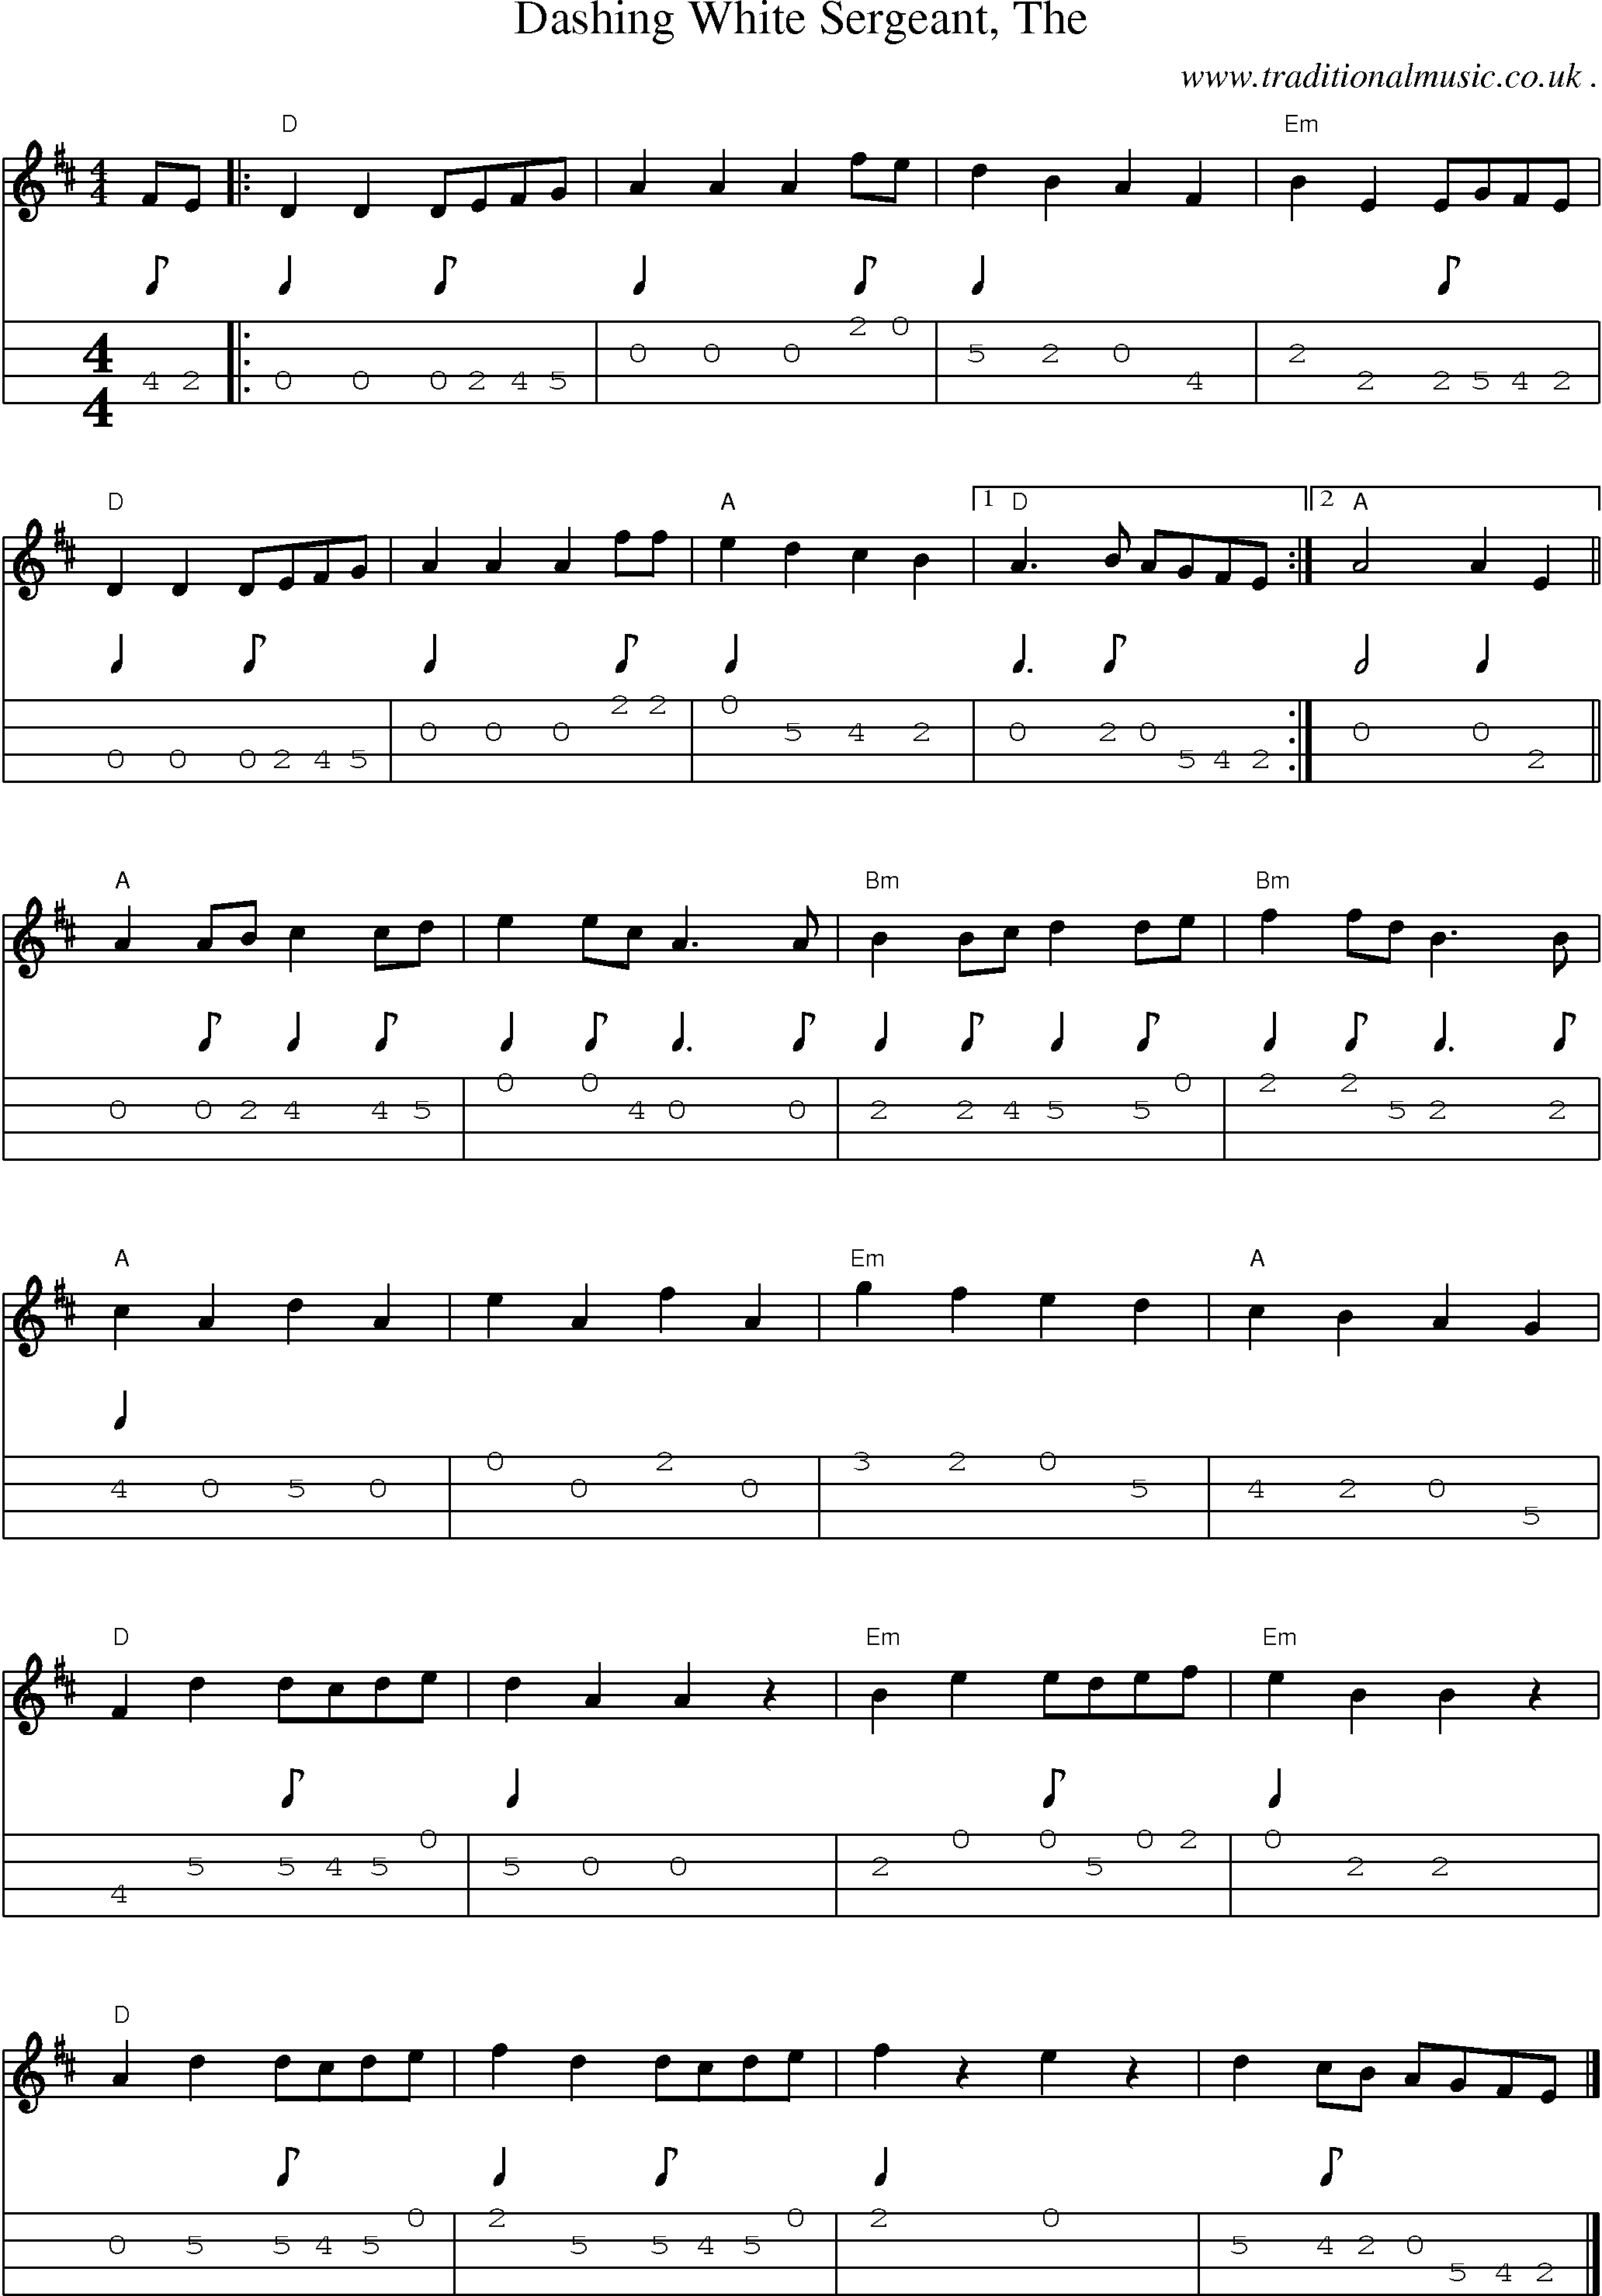 Music Score and Guitar Tabs for Dashing White Sergeant The